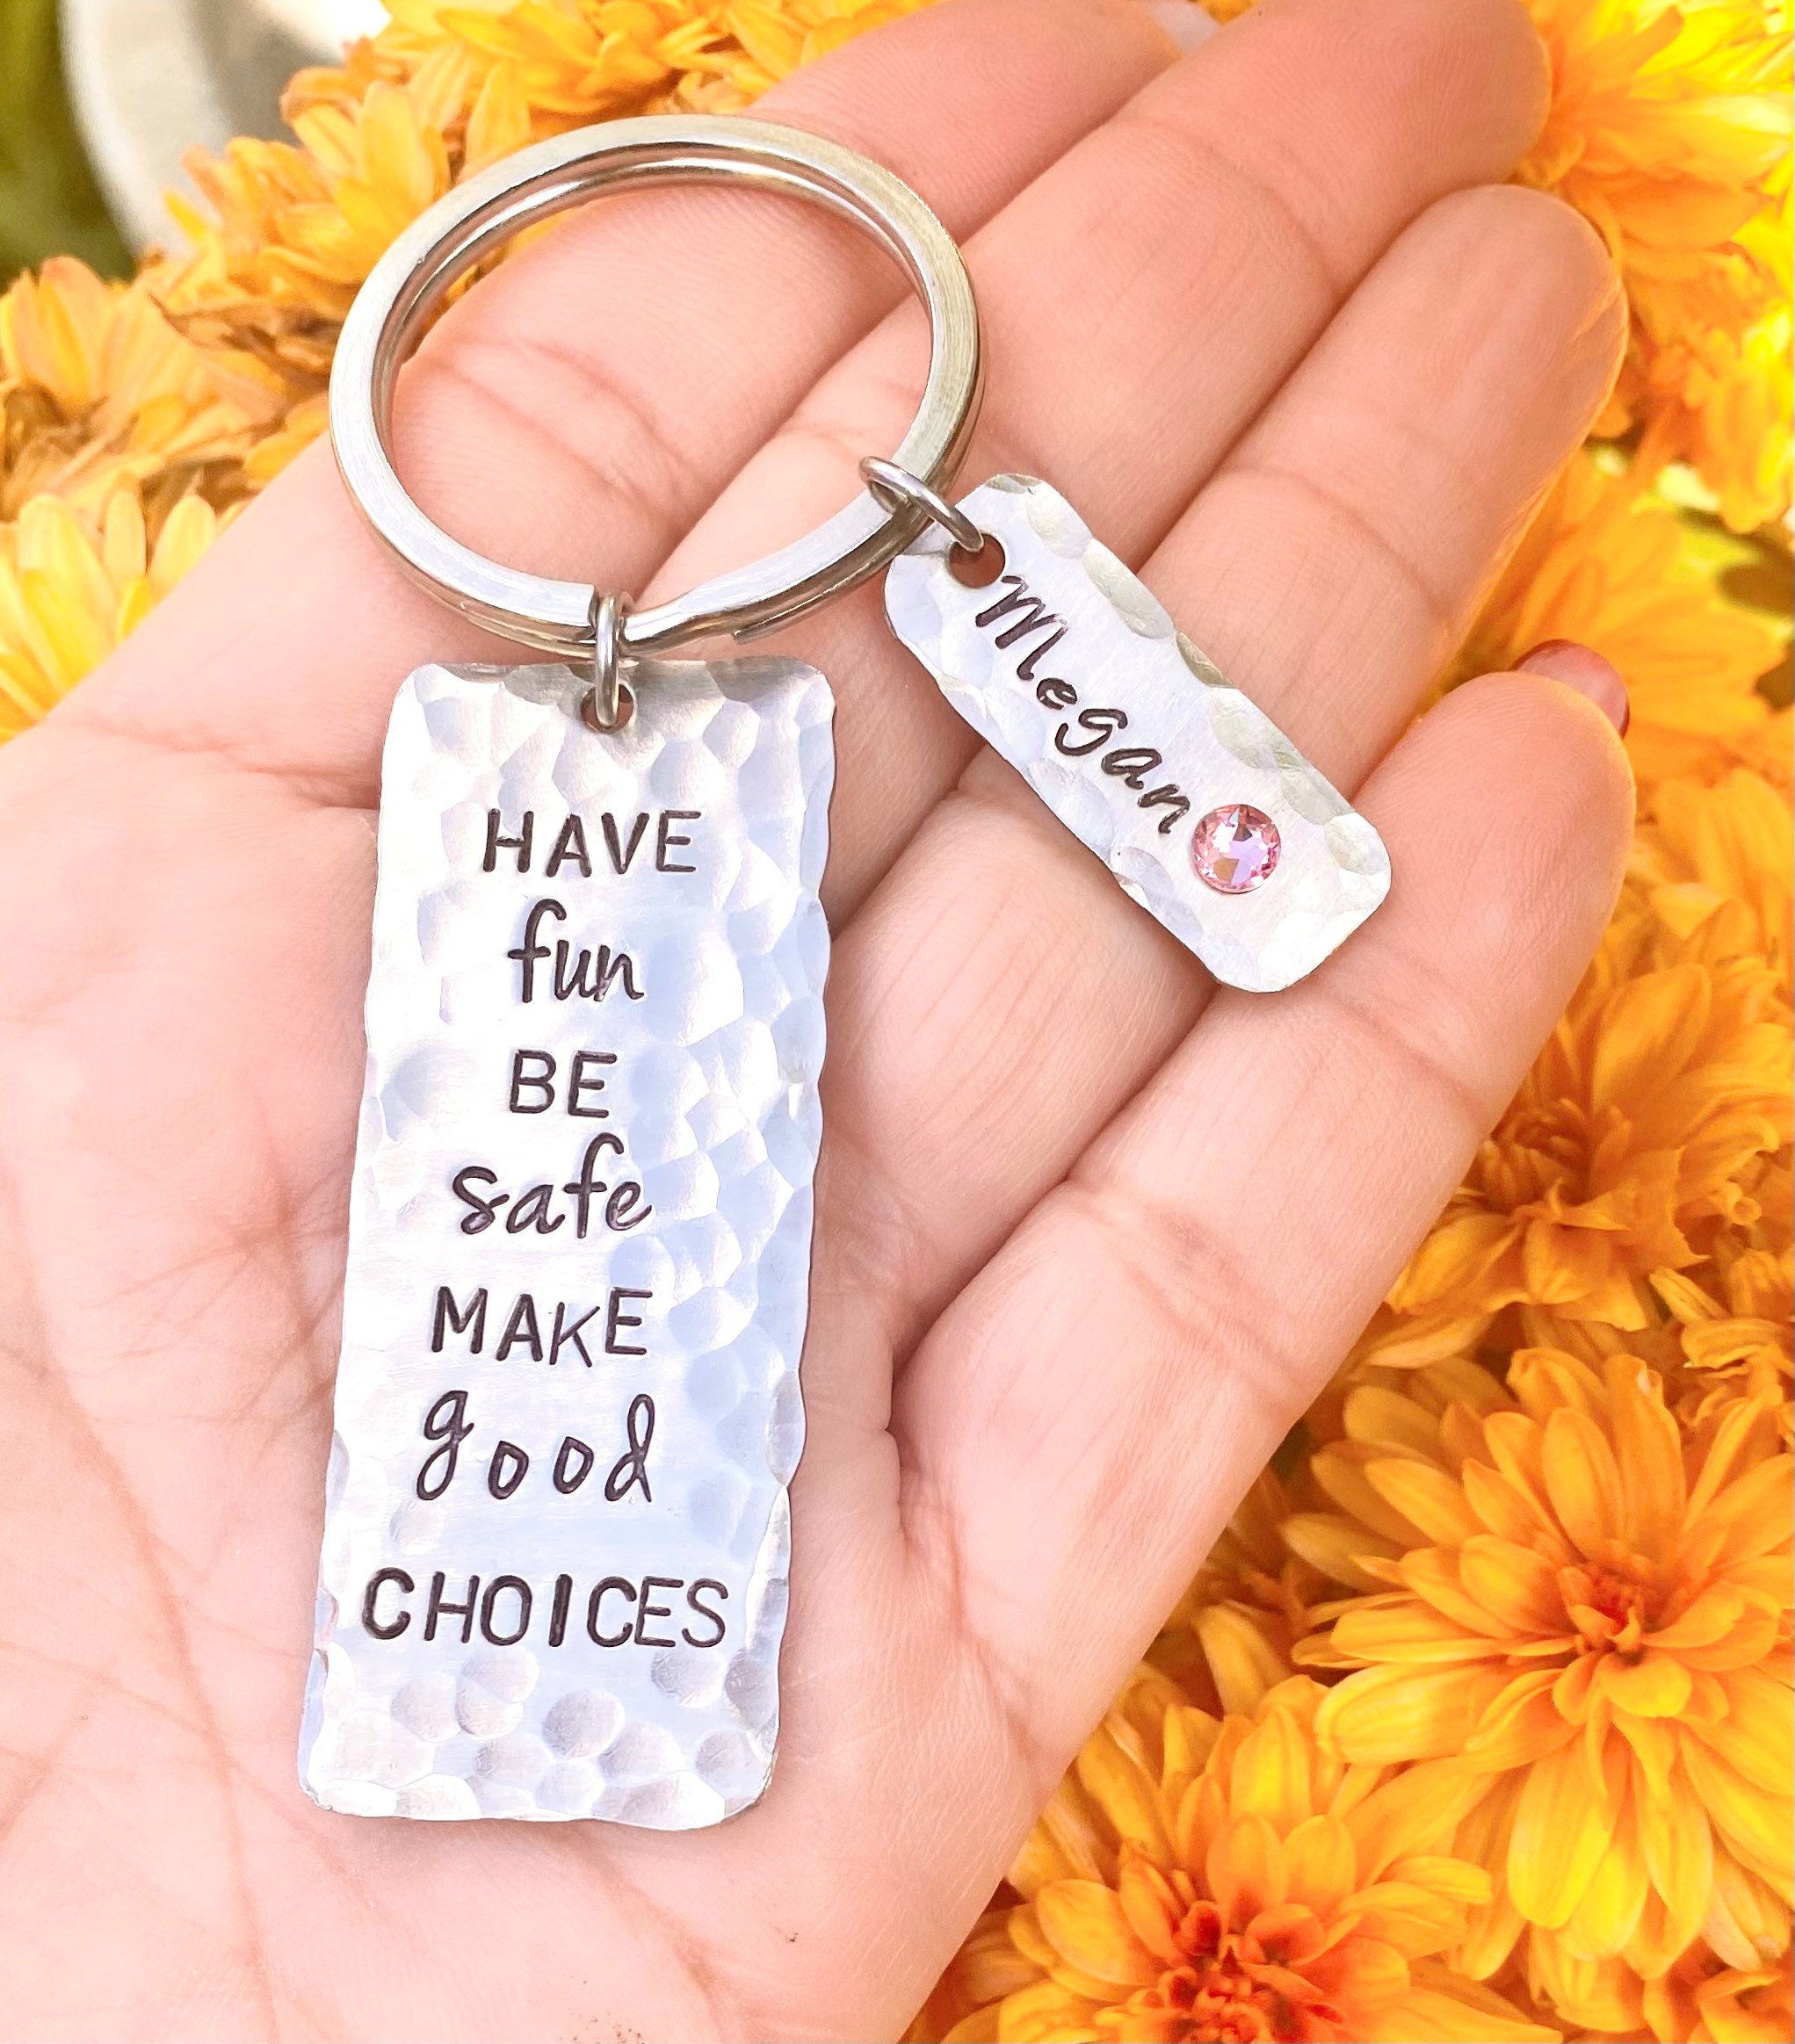 Asdomo Call Your Family Keychain Ornament,New Driver Gifts,Have Fun Be Safe  Make Good Choices Boy Girl Birthday Key Chain Pendant 